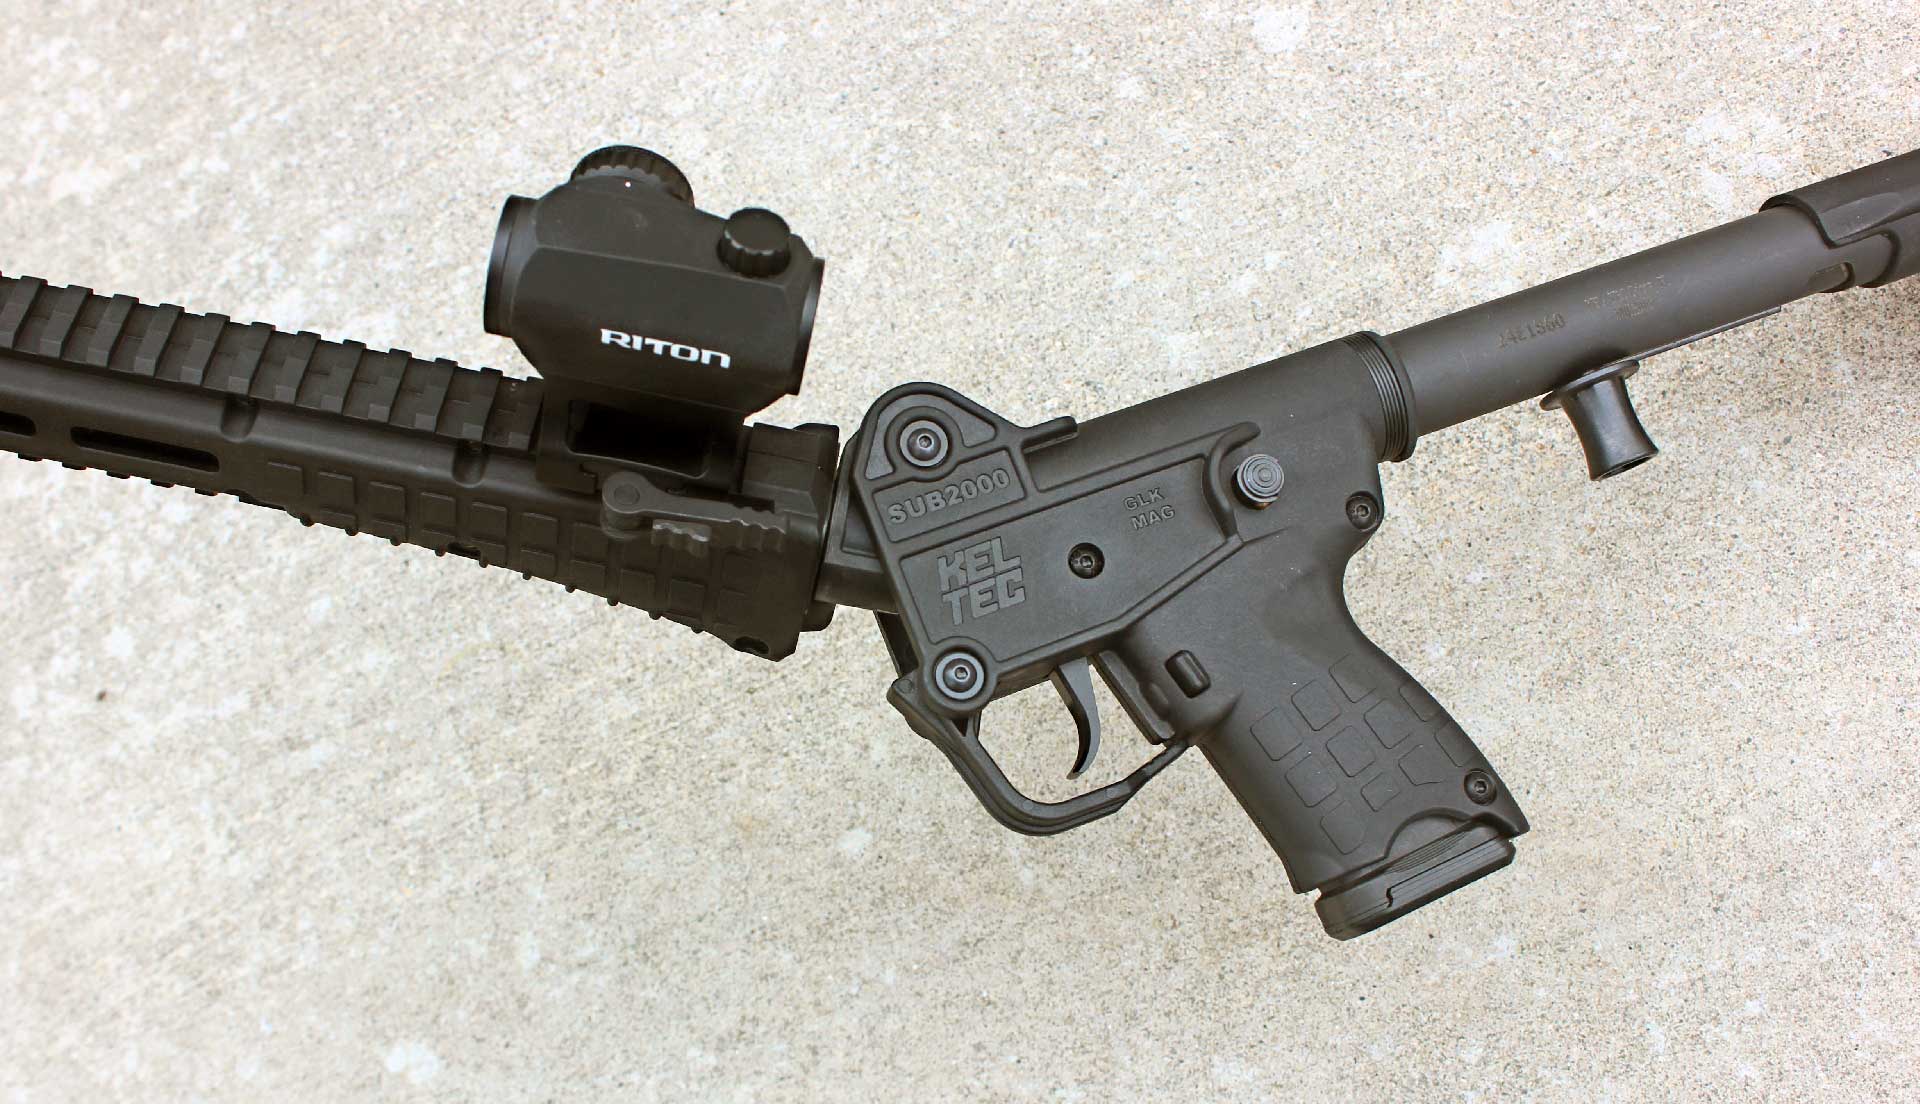 A partially folded KelTec SUB2000 GEN3 carbine, showing the fore-end rotation.